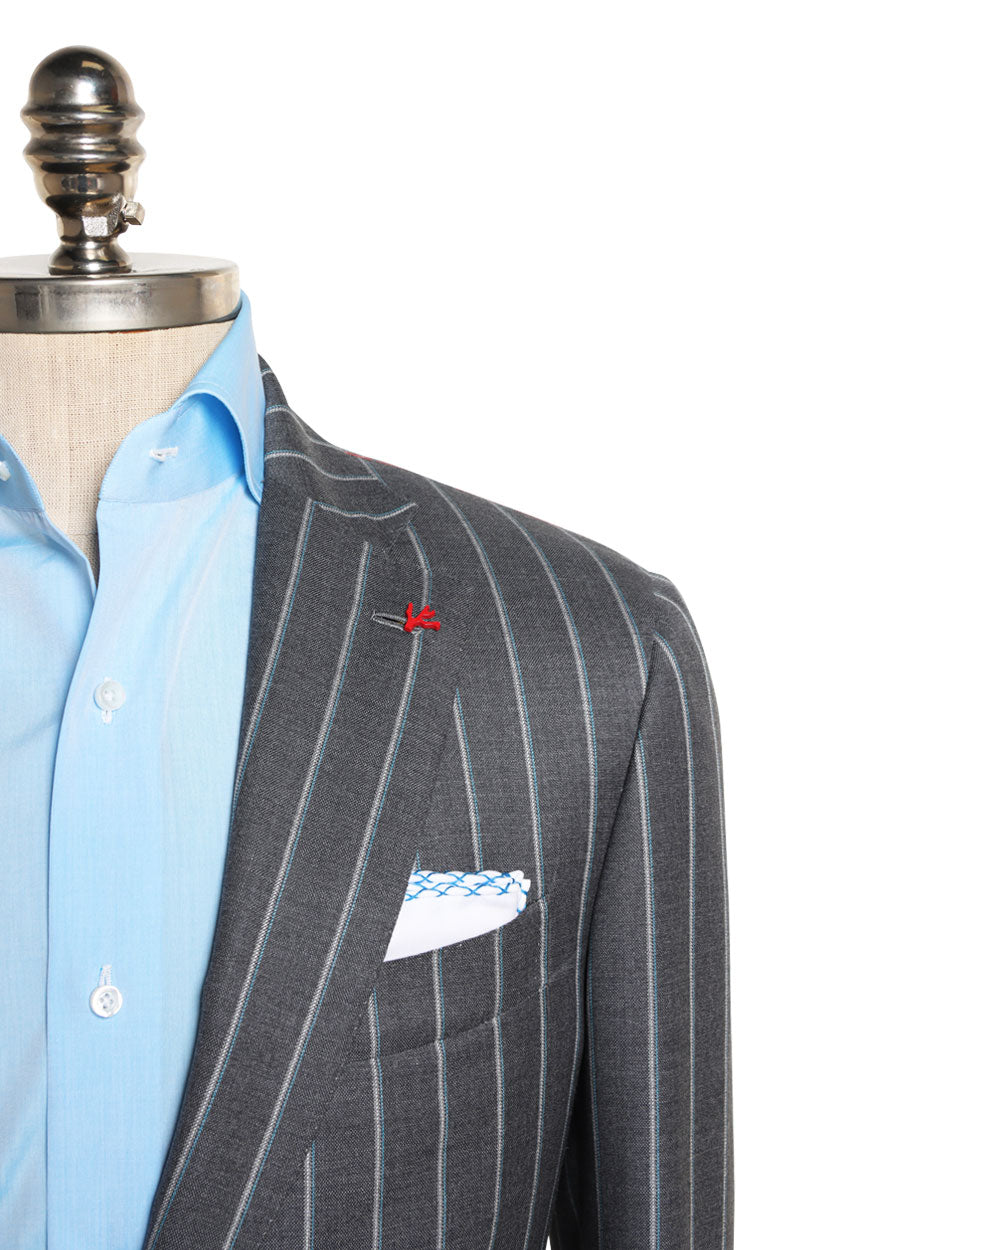 Grey and Blue Striped Wool Suit